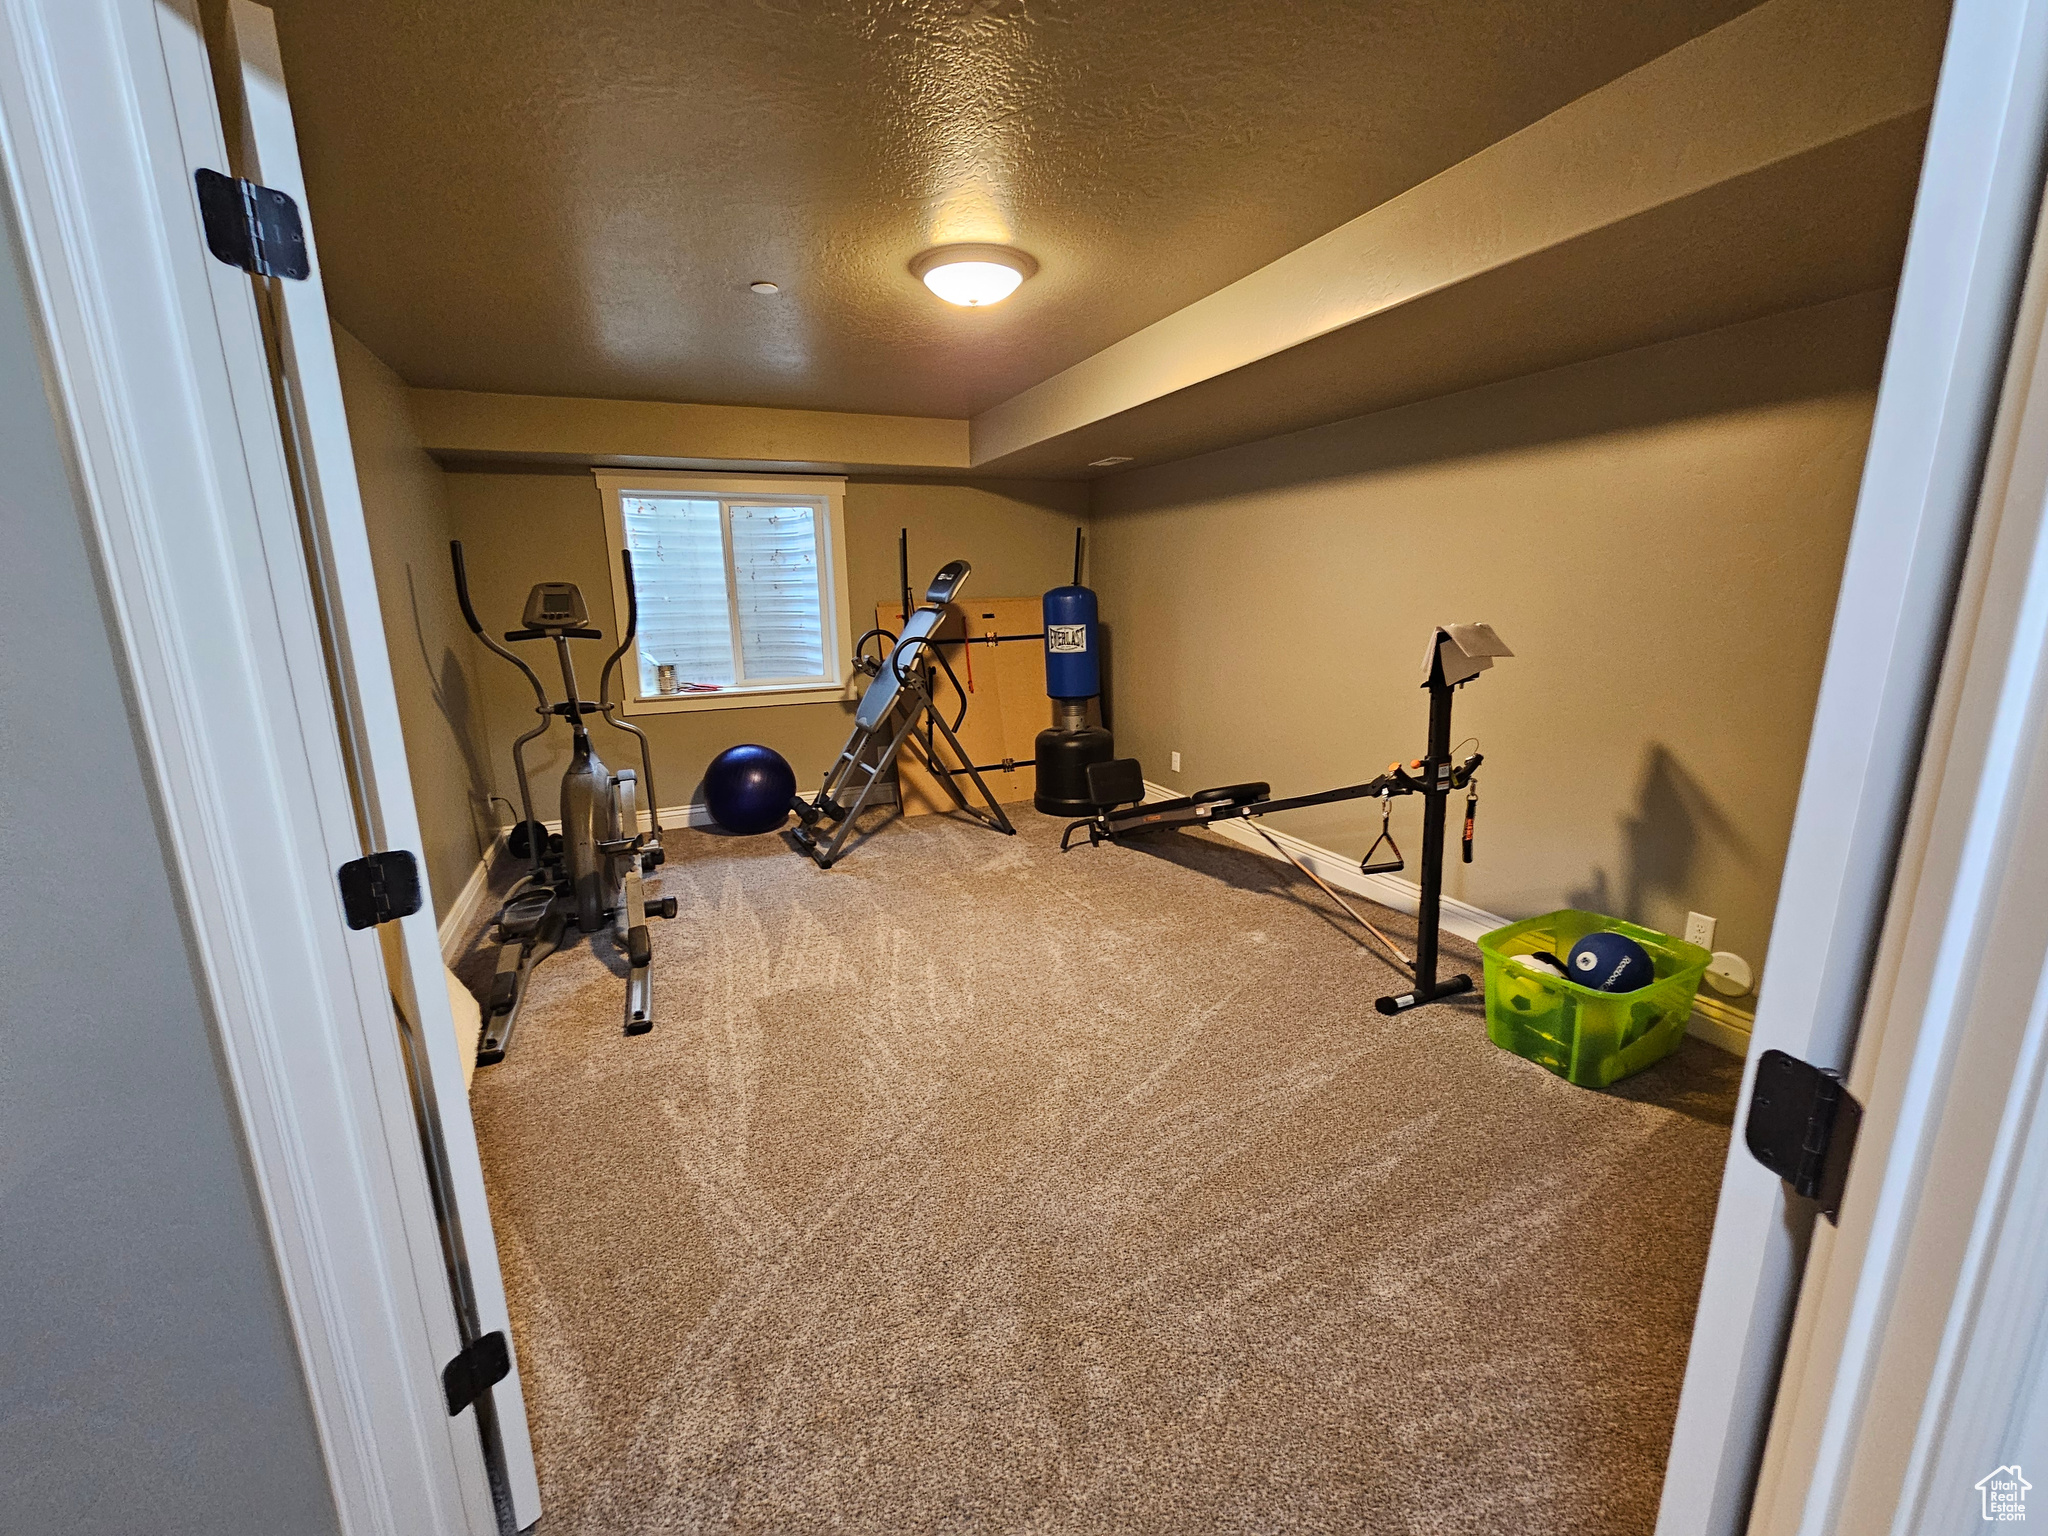 Exercise area with carpet and a textured ceiling